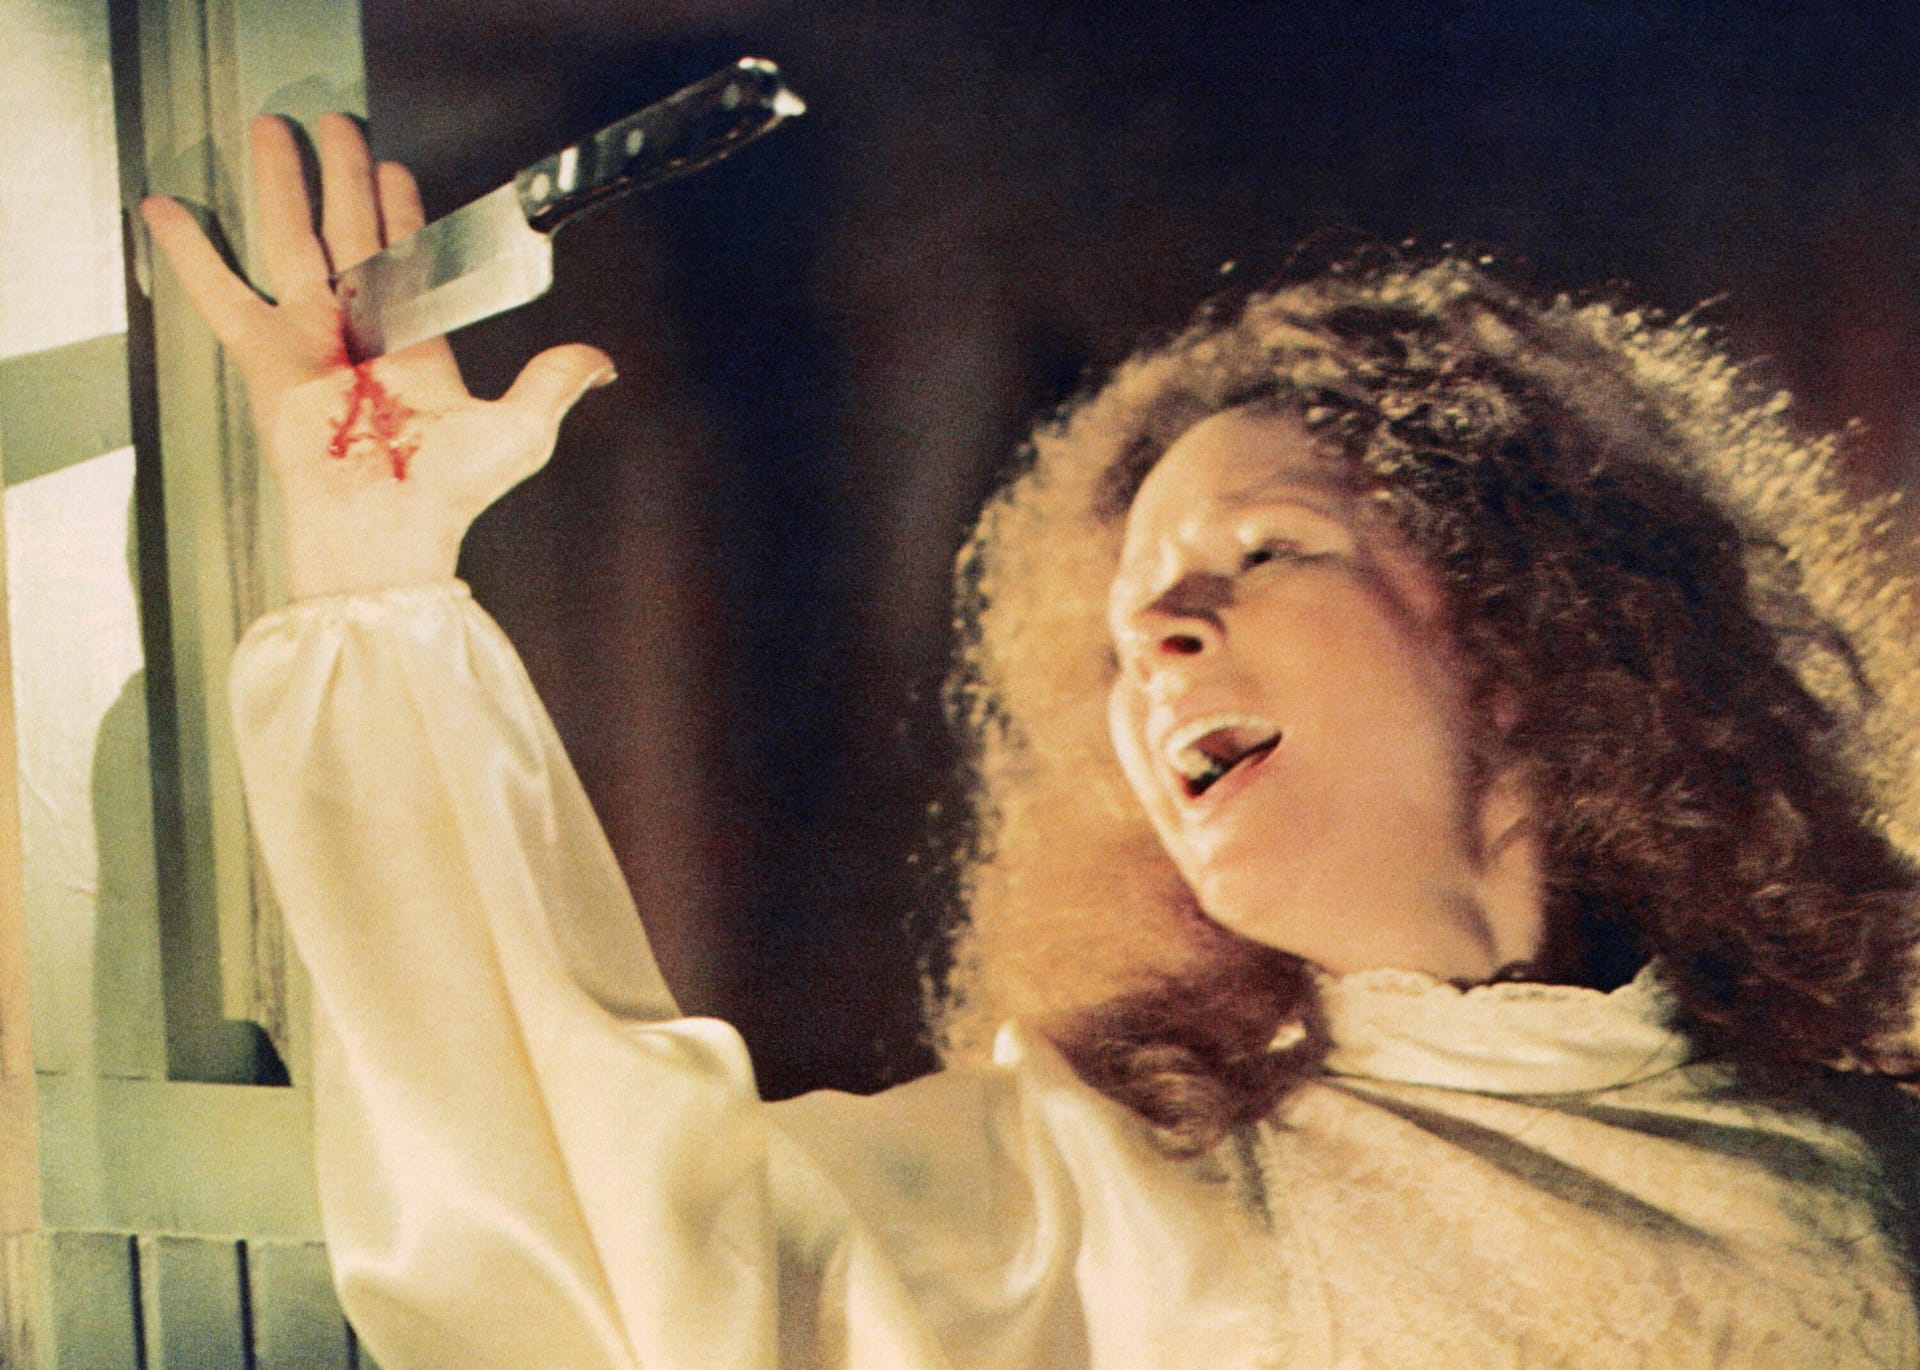 Piper Laurie 1976 in "Carrie"